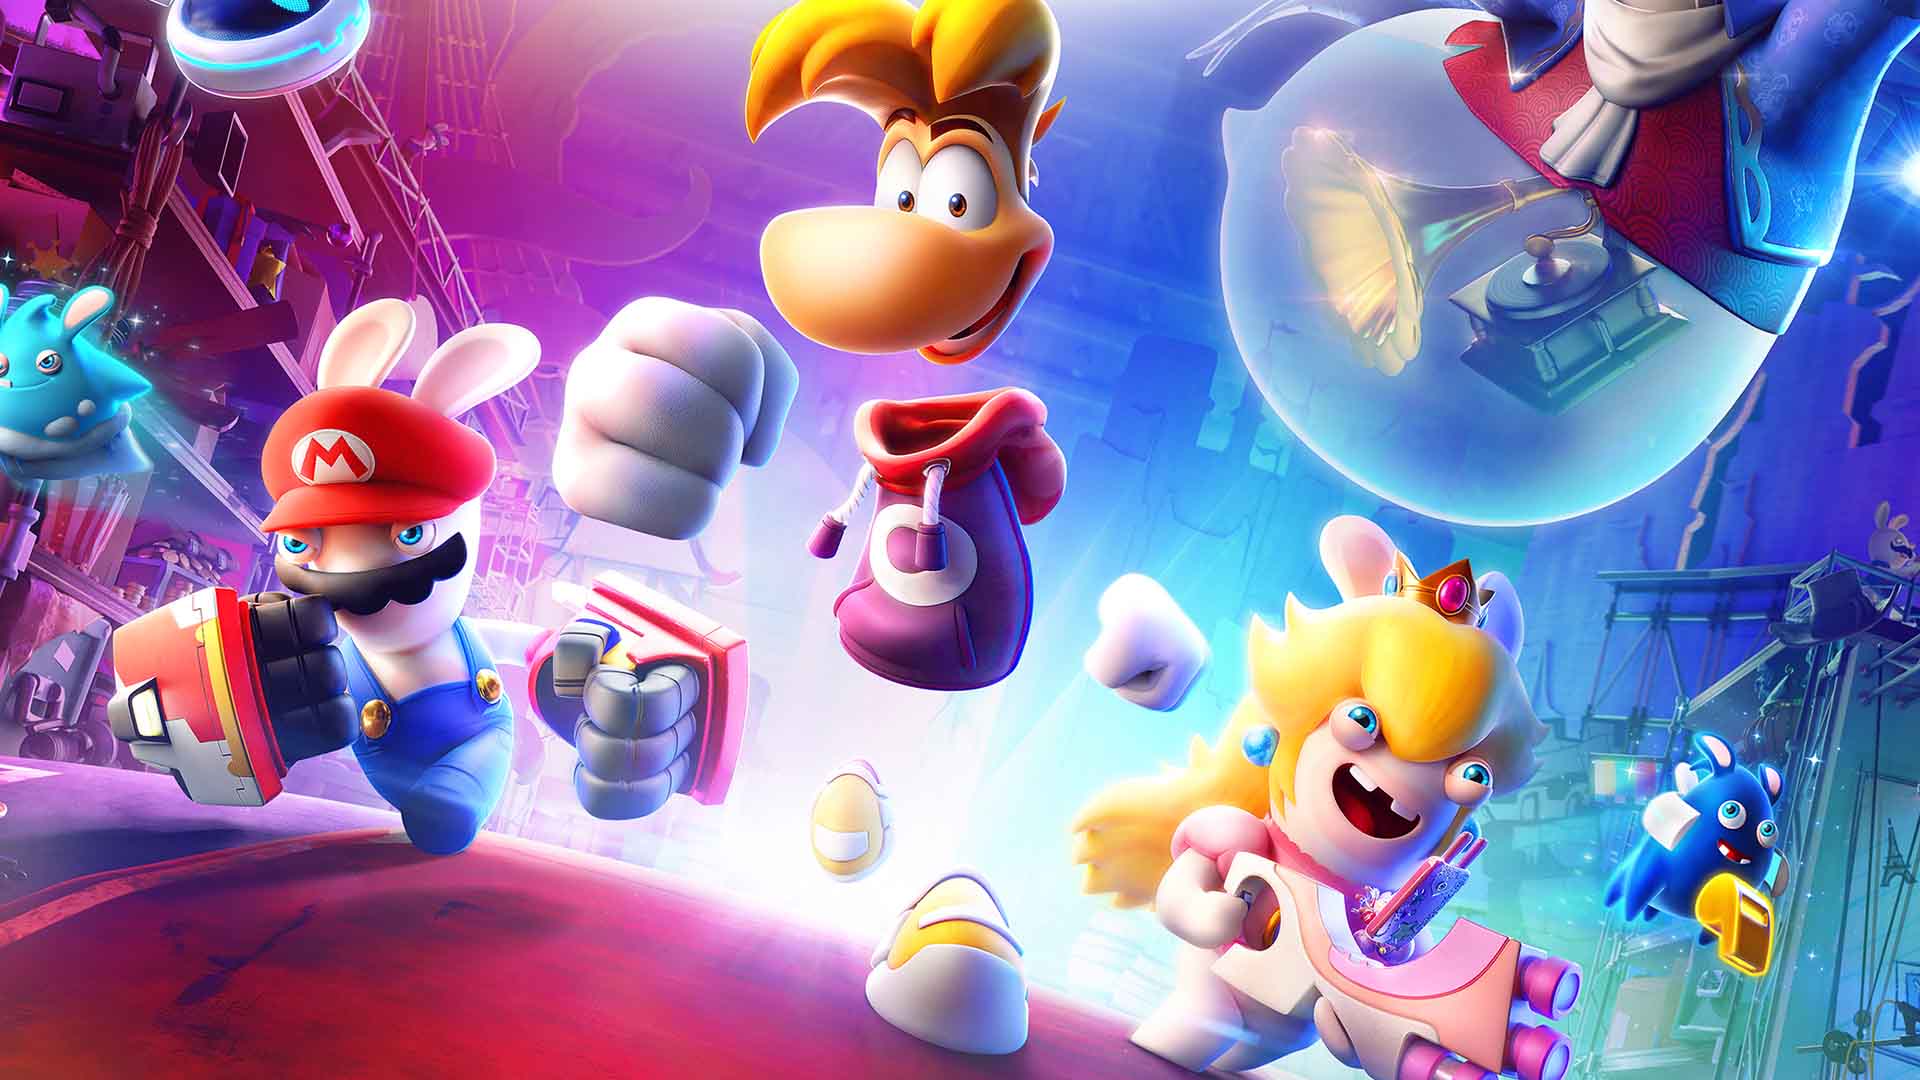 Rayman returns in Mario + Rabbids Sparks of Hope DLC this month